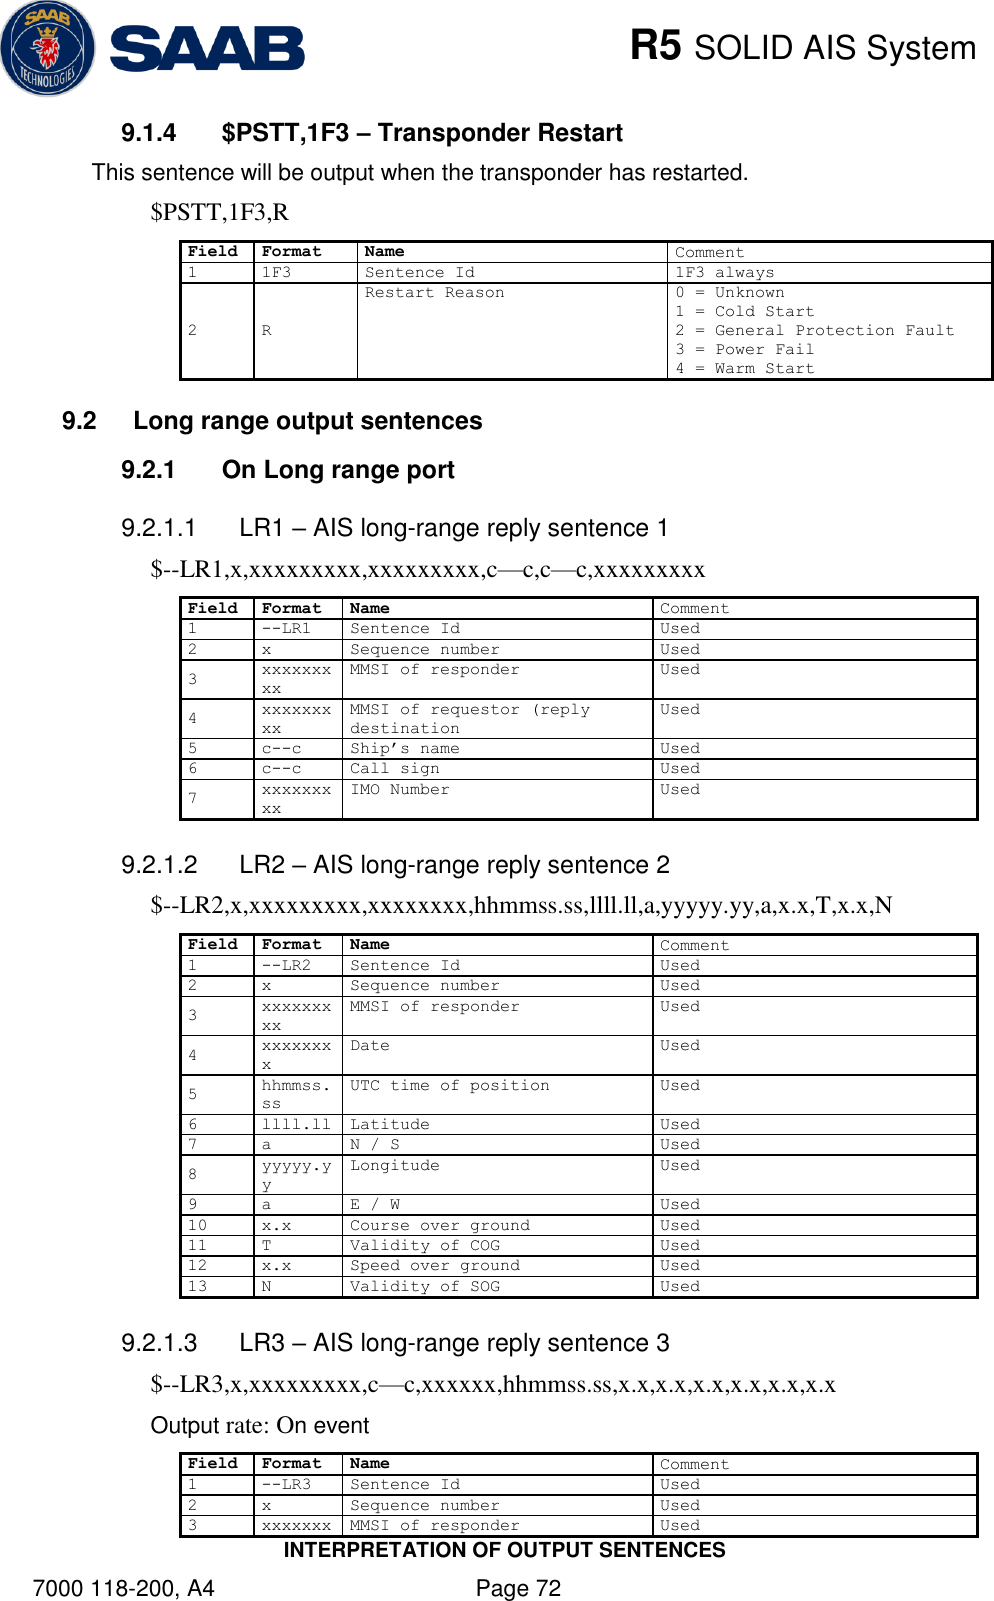    R5 SOLID AIS System INTERPRETATION OF OUTPUT SENTENCES 7000 118-200, A4    Page 72 9.1.4  $PSTT,1F3 – Transponder Restart This sentence will be output when the transponder has restarted. $PSTT,1F3,R Field Format Name Comment 1 1F3 Sentence Id 1F3 always 2 R Restart Reason 0 = Unknown 1 = Cold Start 2 = General Protection Fault 3 = Power Fail 4 = Warm Start 9.2  Long range output sentences 9.2.1  On Long range port 9.2.1.1  LR1 – AIS long-range reply sentence 1 $--LR1,x,xxxxxxxxx,xxxxxxxxx,c—c,c—c,xxxxxxxxx Field Format Name Comment 1 --LR1 Sentence Id Used 2 x Sequence number Used 3 xxxxxxxxx MMSI of responder Used 4 xxxxxxxxx MMSI of requestor (reply destination Used 5 c--c Ship‟s name Used 6 c--c Call sign Used 7 xxxxxxxxx IMO Number Used 9.2.1.2  LR2 – AIS long-range reply sentence 2 $--LR2,x,xxxxxxxxx,xxxxxxxx,hhmmss.ss,llll.ll,a,yyyyy.yy,a,x.x,T,x.x,N Field Format Name Comment 1 --LR2 Sentence Id Used 2 x Sequence number Used 3 xxxxxxxxx MMSI of responder Used 4 xxxxxxxx Date Used 5 hhmmss.ss UTC time of position Used 6 llll.ll Latitude Used 7 a N / S Used 8 yyyyy.yy Longitude Used 9 a E / W Used 10 x.x Course over ground Used 11 T Validity of COG Used 12 x.x Speed over ground Used 13 N Validity of SOG Used 9.2.1.3  LR3 – AIS long-range reply sentence 3 $--LR3,x,xxxxxxxxx,c—c,xxxxxx,hhmmss.ss,x.x,x.x,x.x,x.x,x.x,x.x Output rate: On event Field Format Name Comment 1 --LR3 Sentence Id Used 2 x Sequence number Used 3 xxxxxxxMMSI of responder Used 